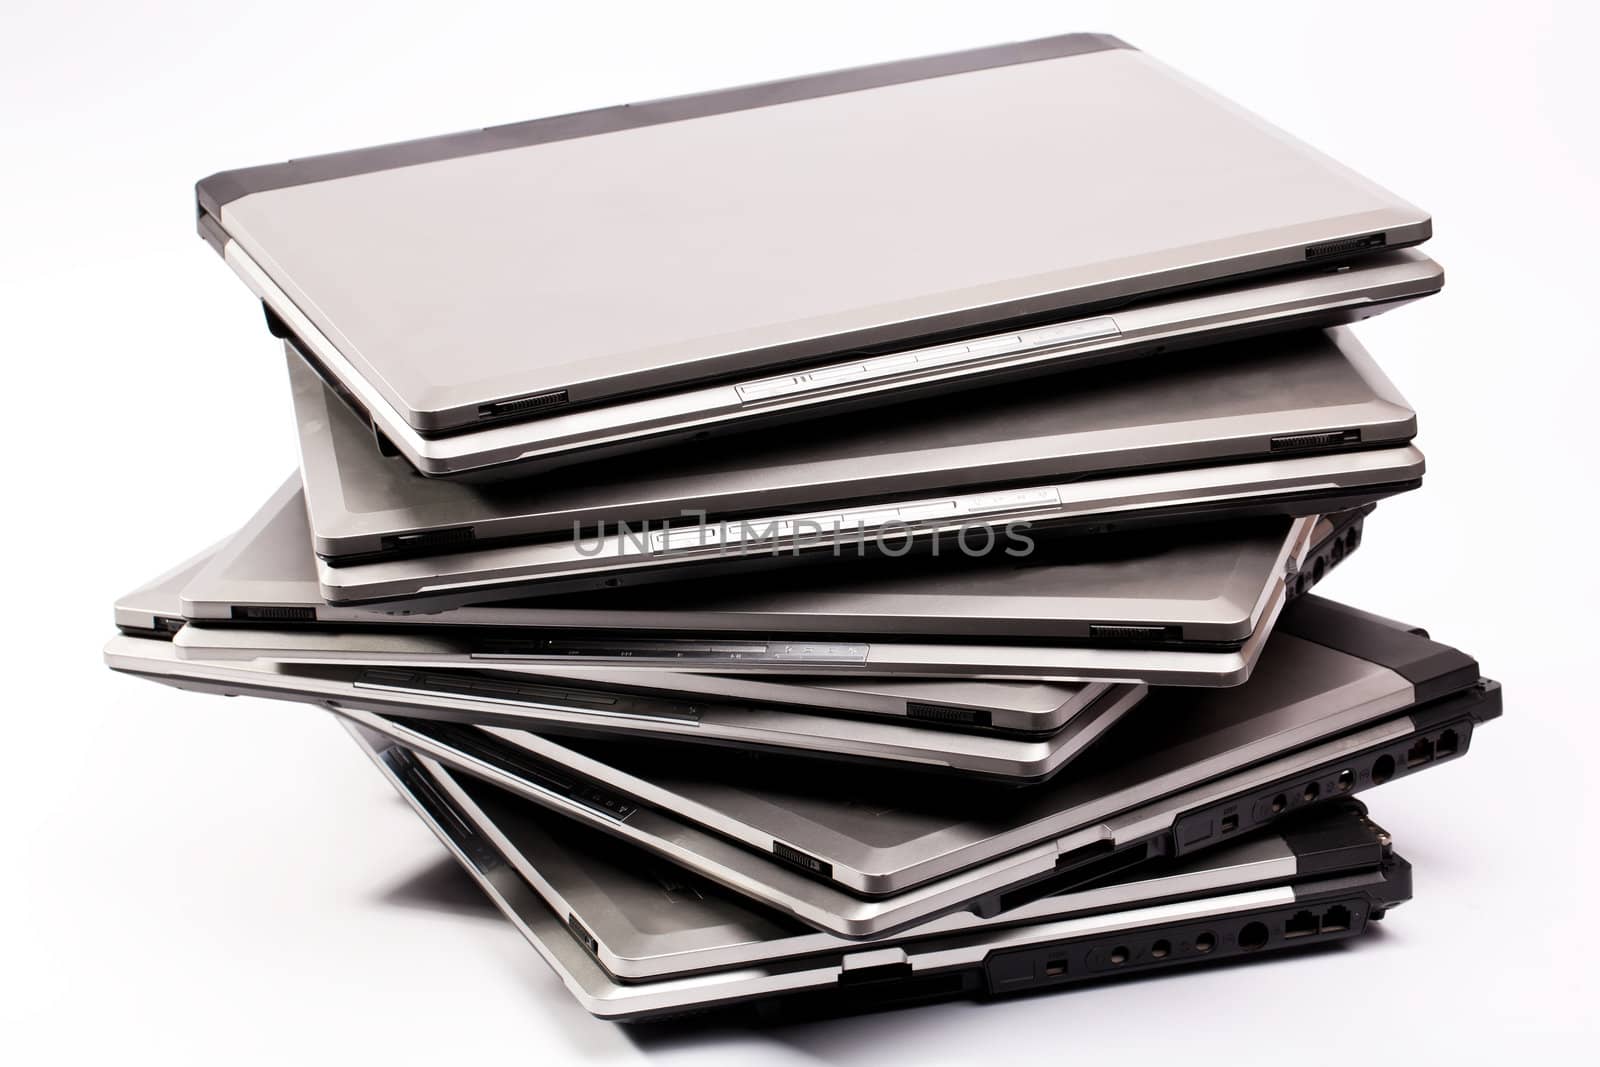 Pile of laptops on the white background